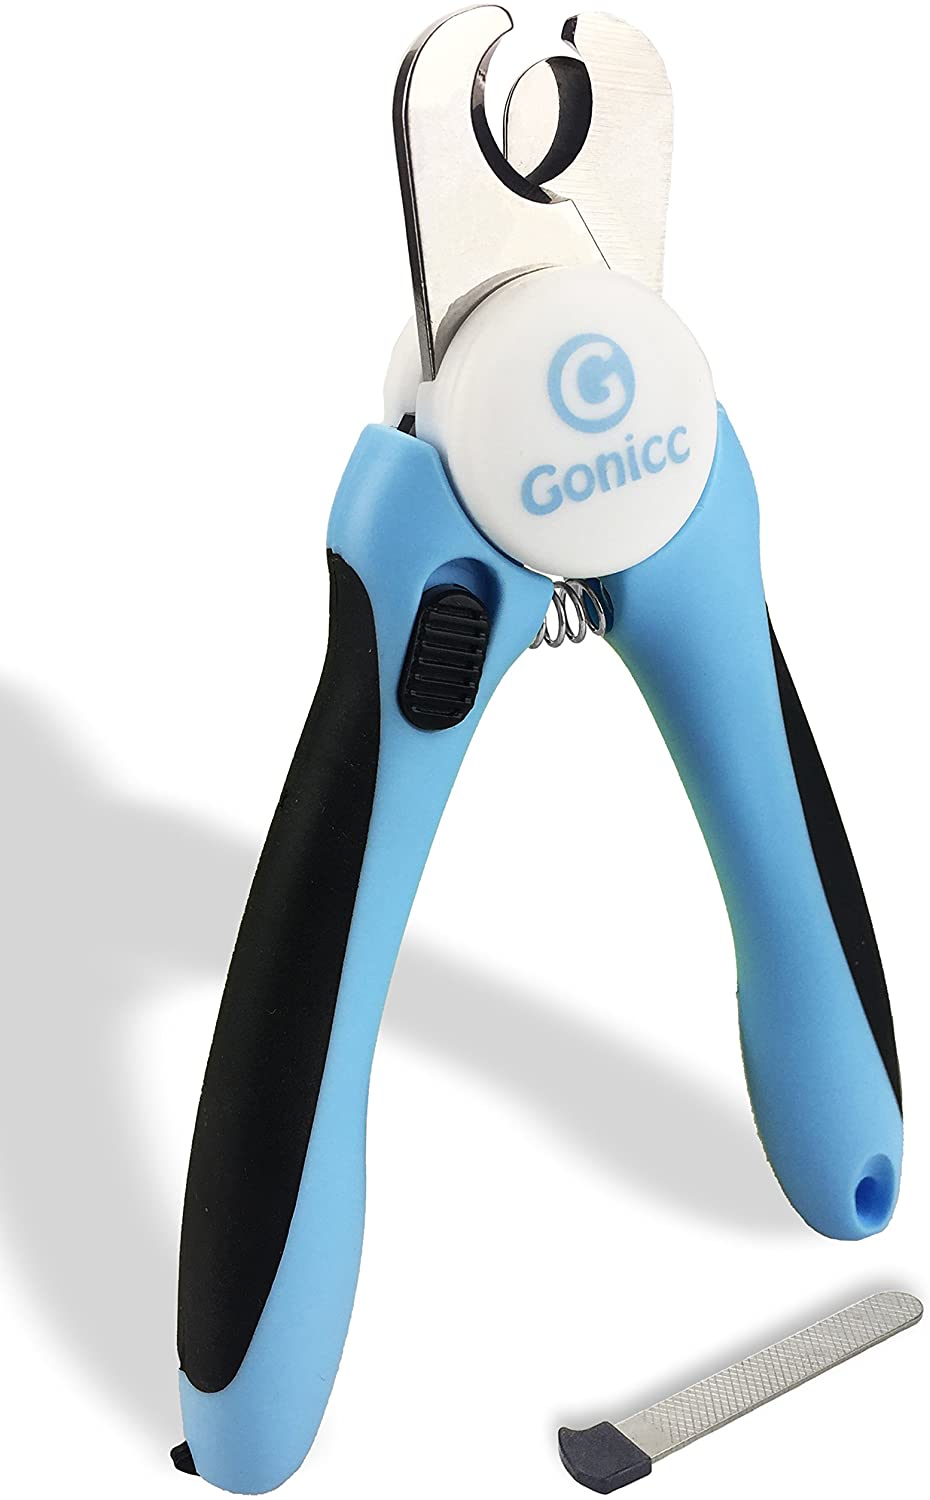 Gonnic Pets Nail Clipper and Trimmer 